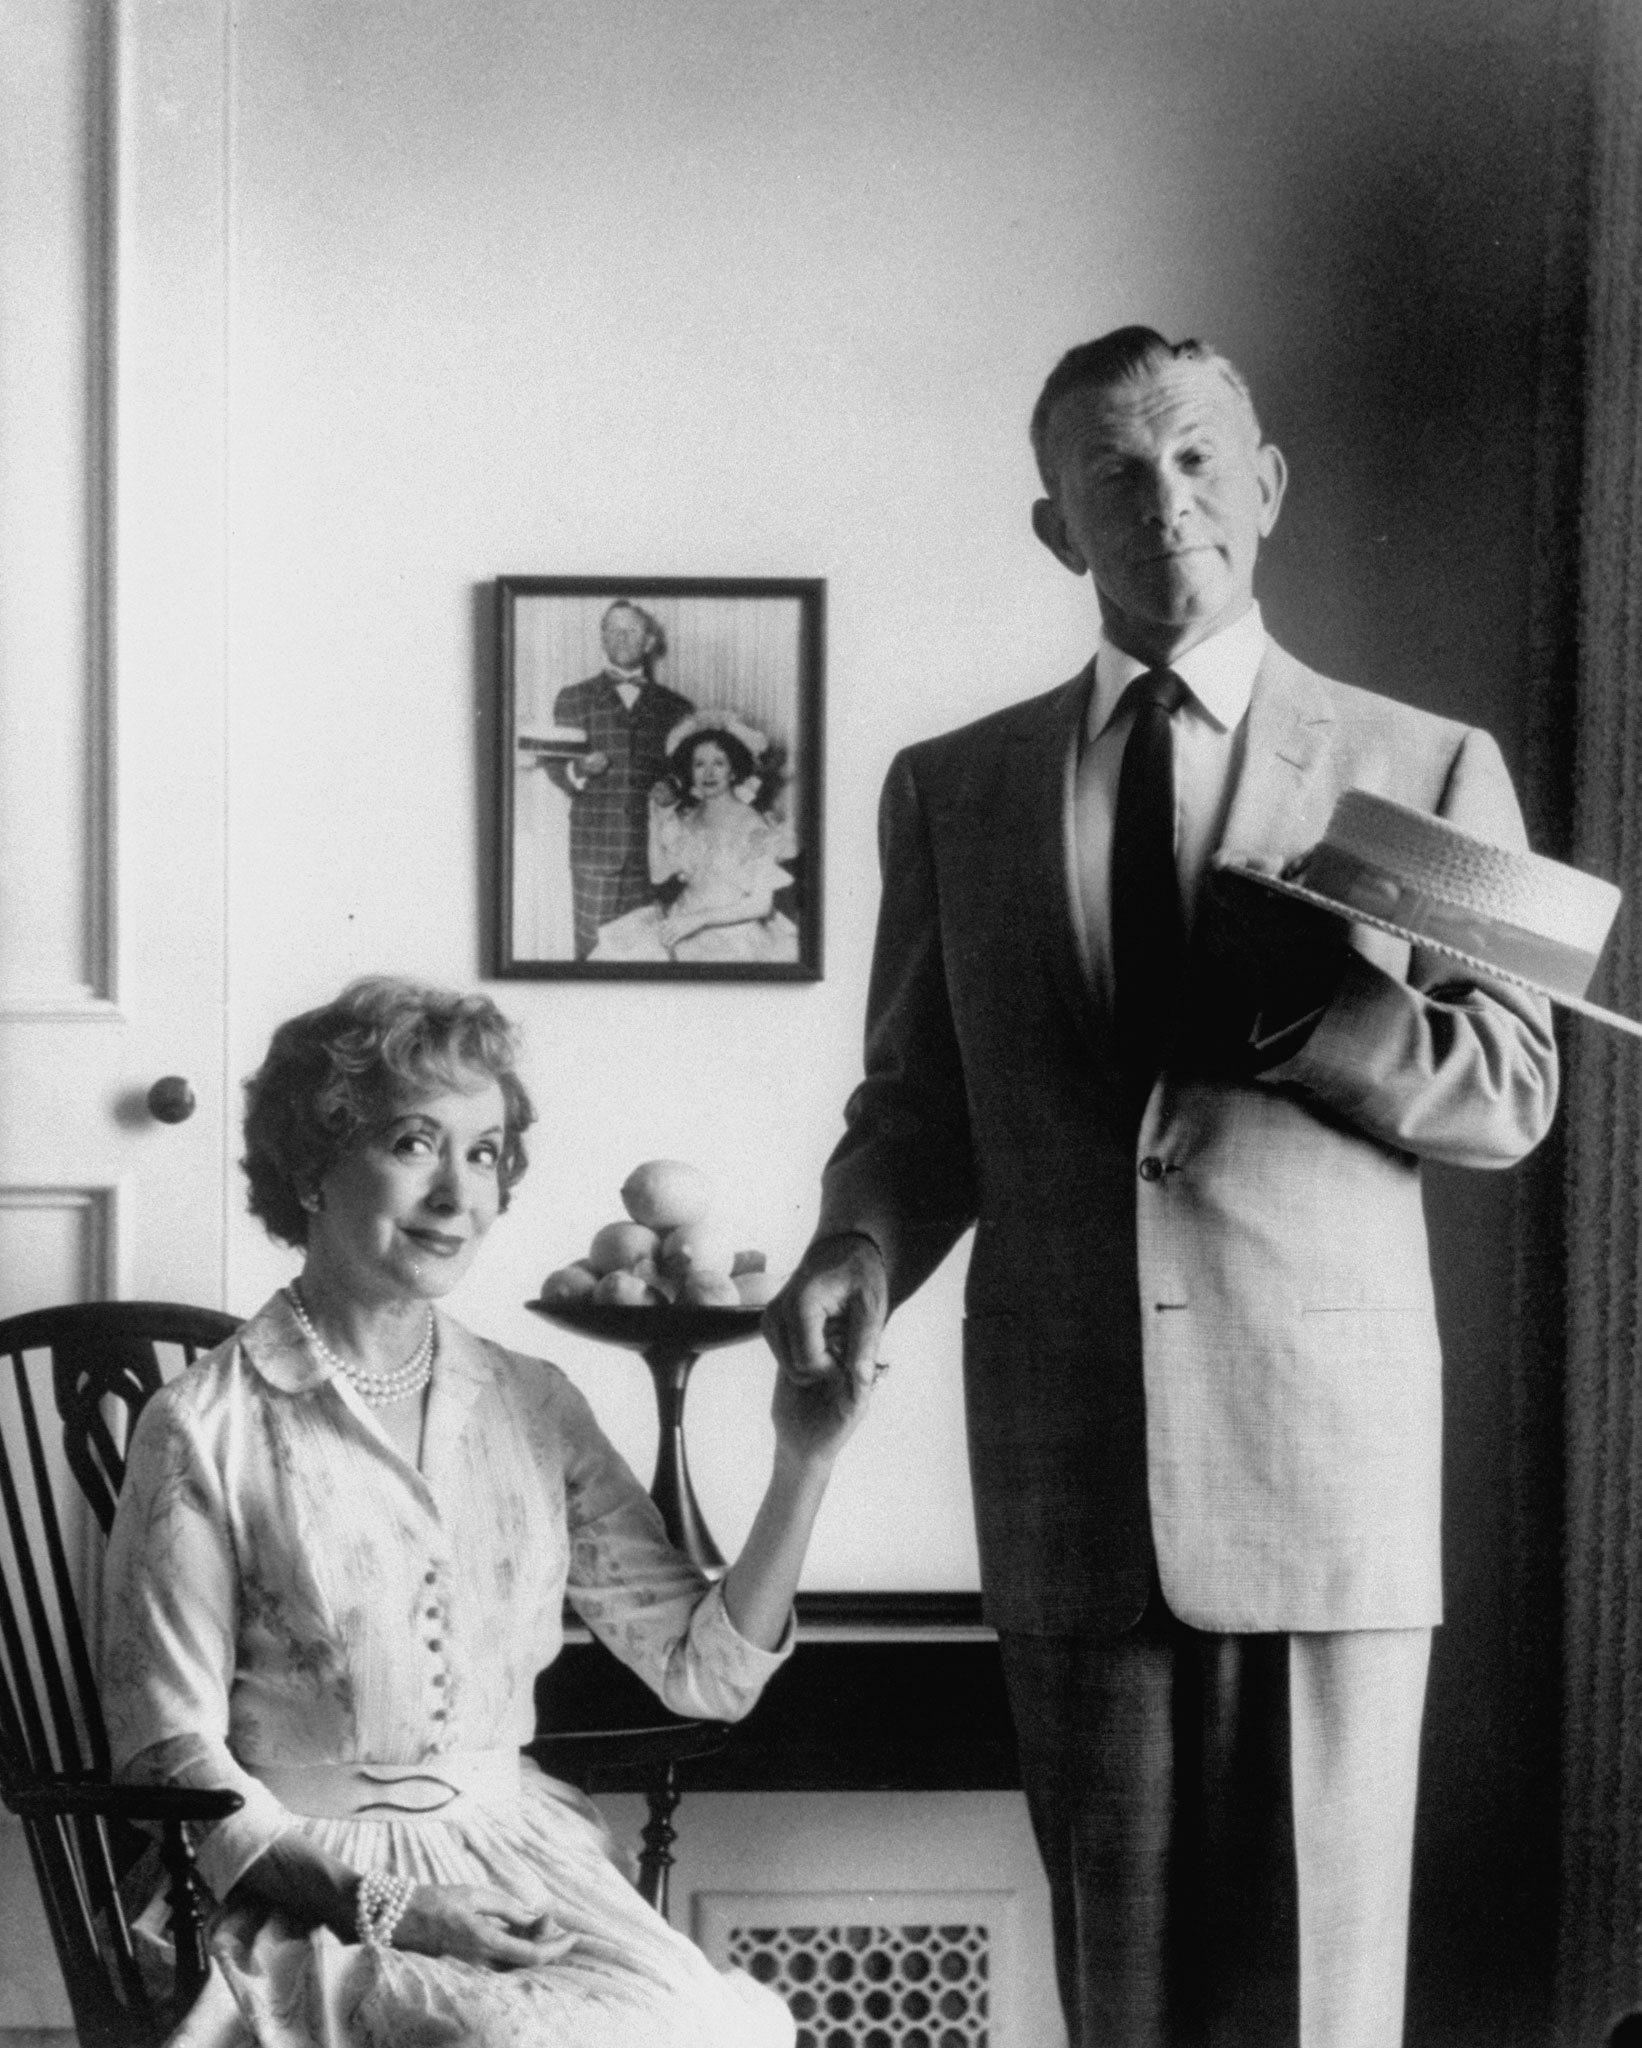 George Burns and his wife, Gracie Allen, 1958.